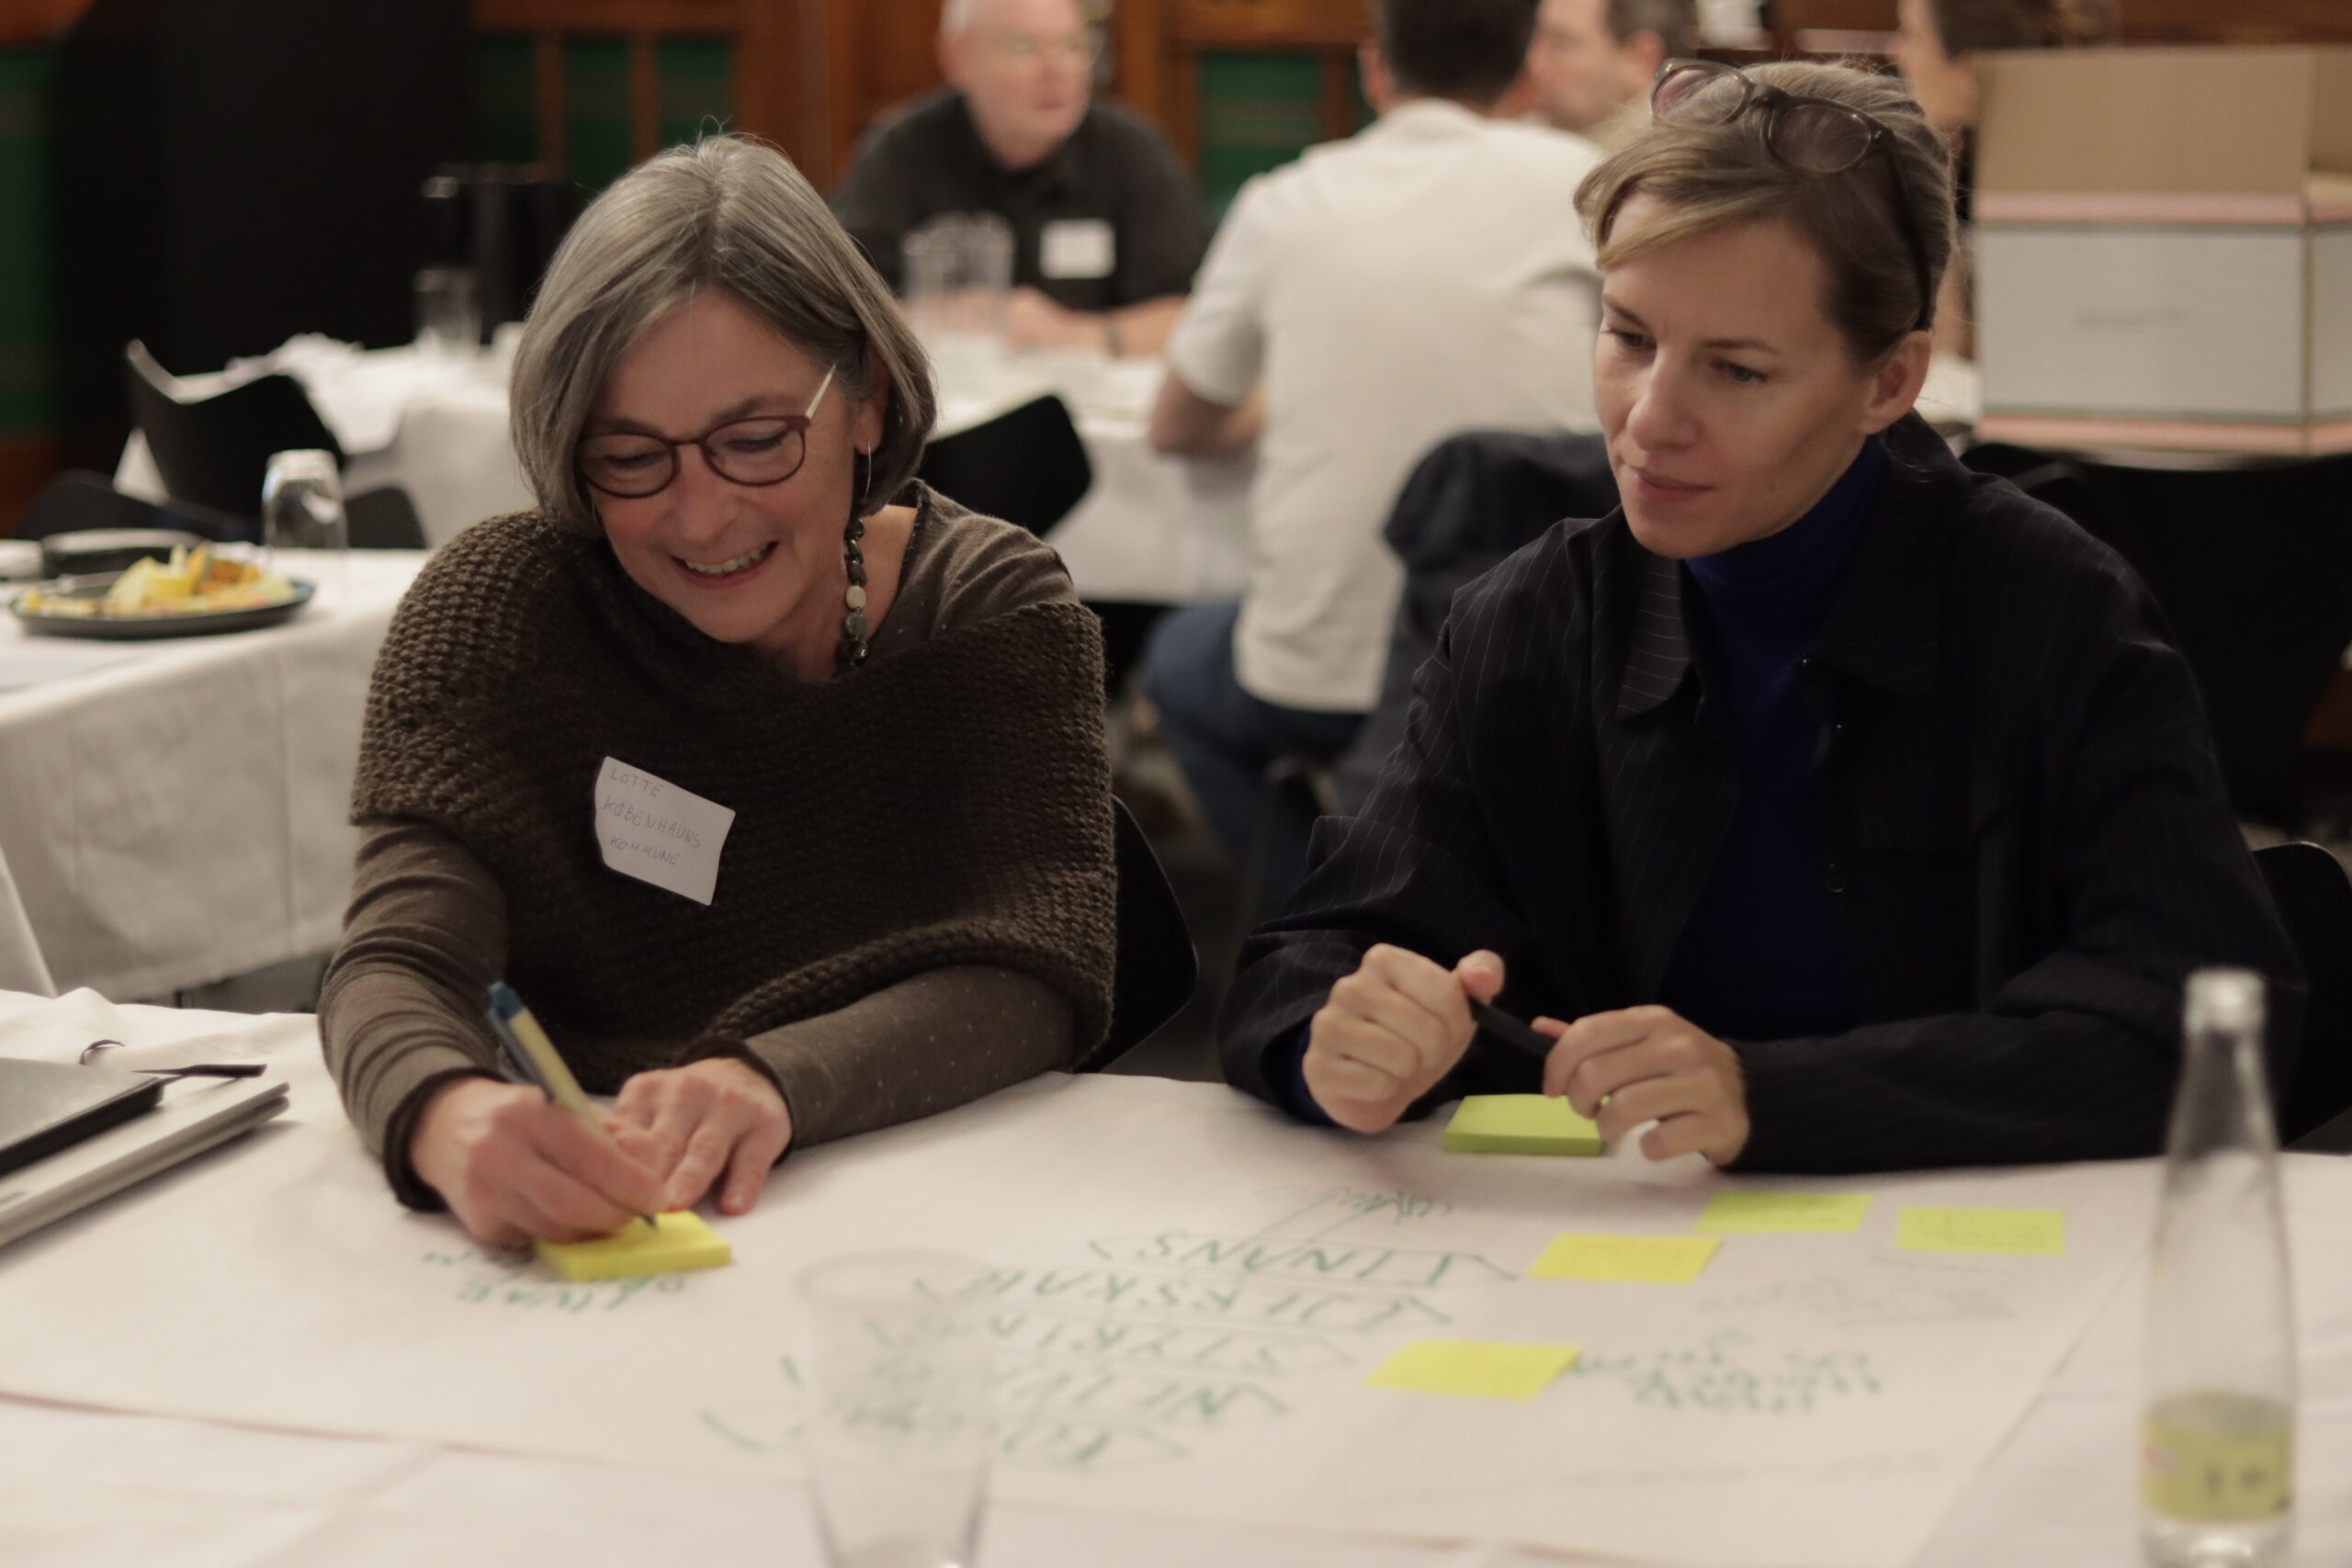 Collaborative Workshops: Crafting Copenhagen’s Climate Roadmap for 2035